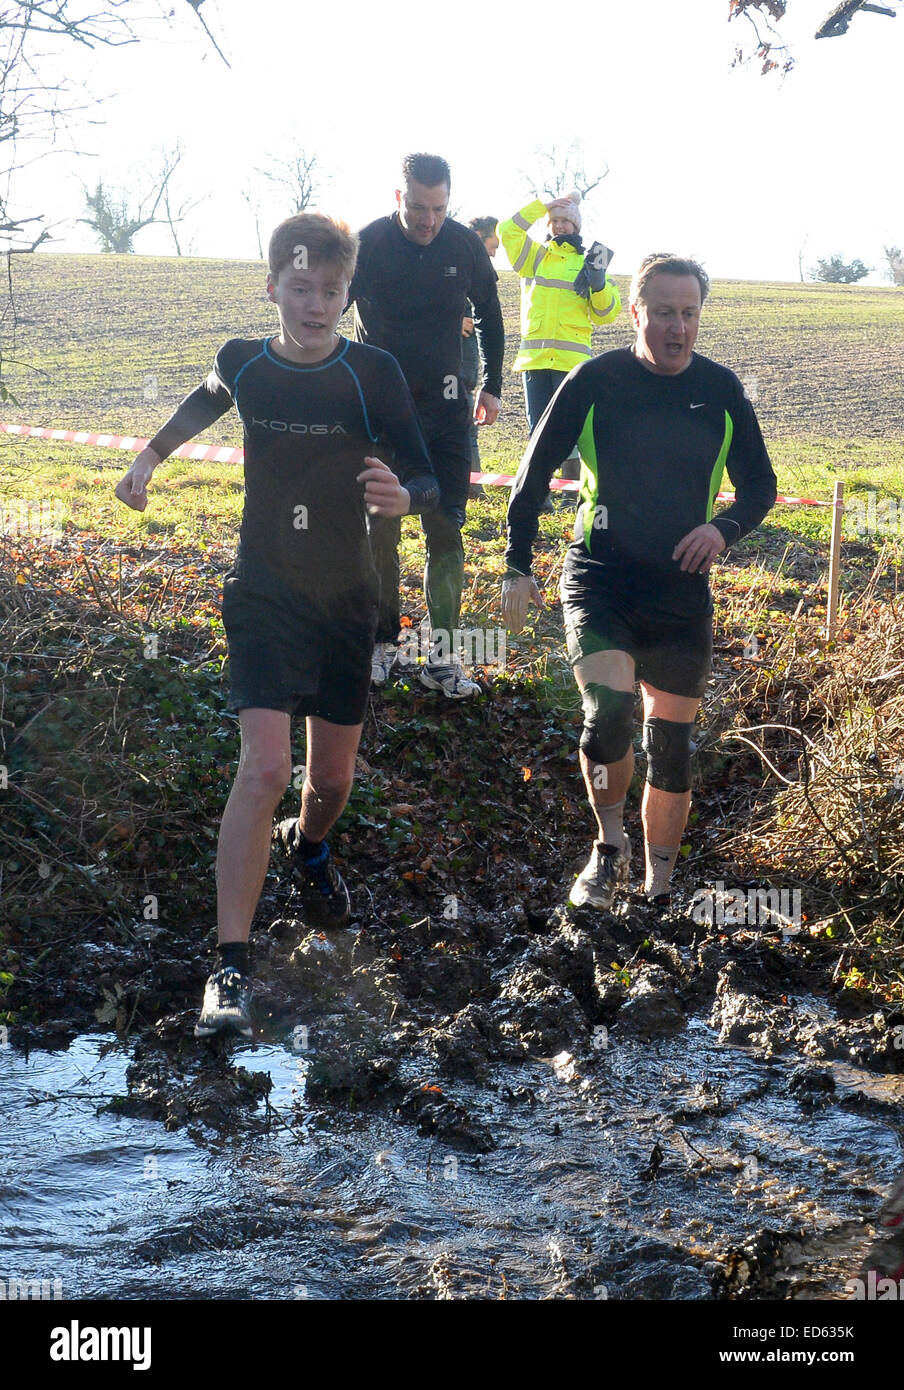 Chadlington, Oxfordshire, UK. 29th December, 2014. Prime Mininster David Cameron competes in The Great Brook Run which starts and finishes at The Tite Inn, Chadlington, Oxfordshire, UK. Pic by Denis Kennedy Credit:  Denis Kennedy/Alamy Live News Stock Photo